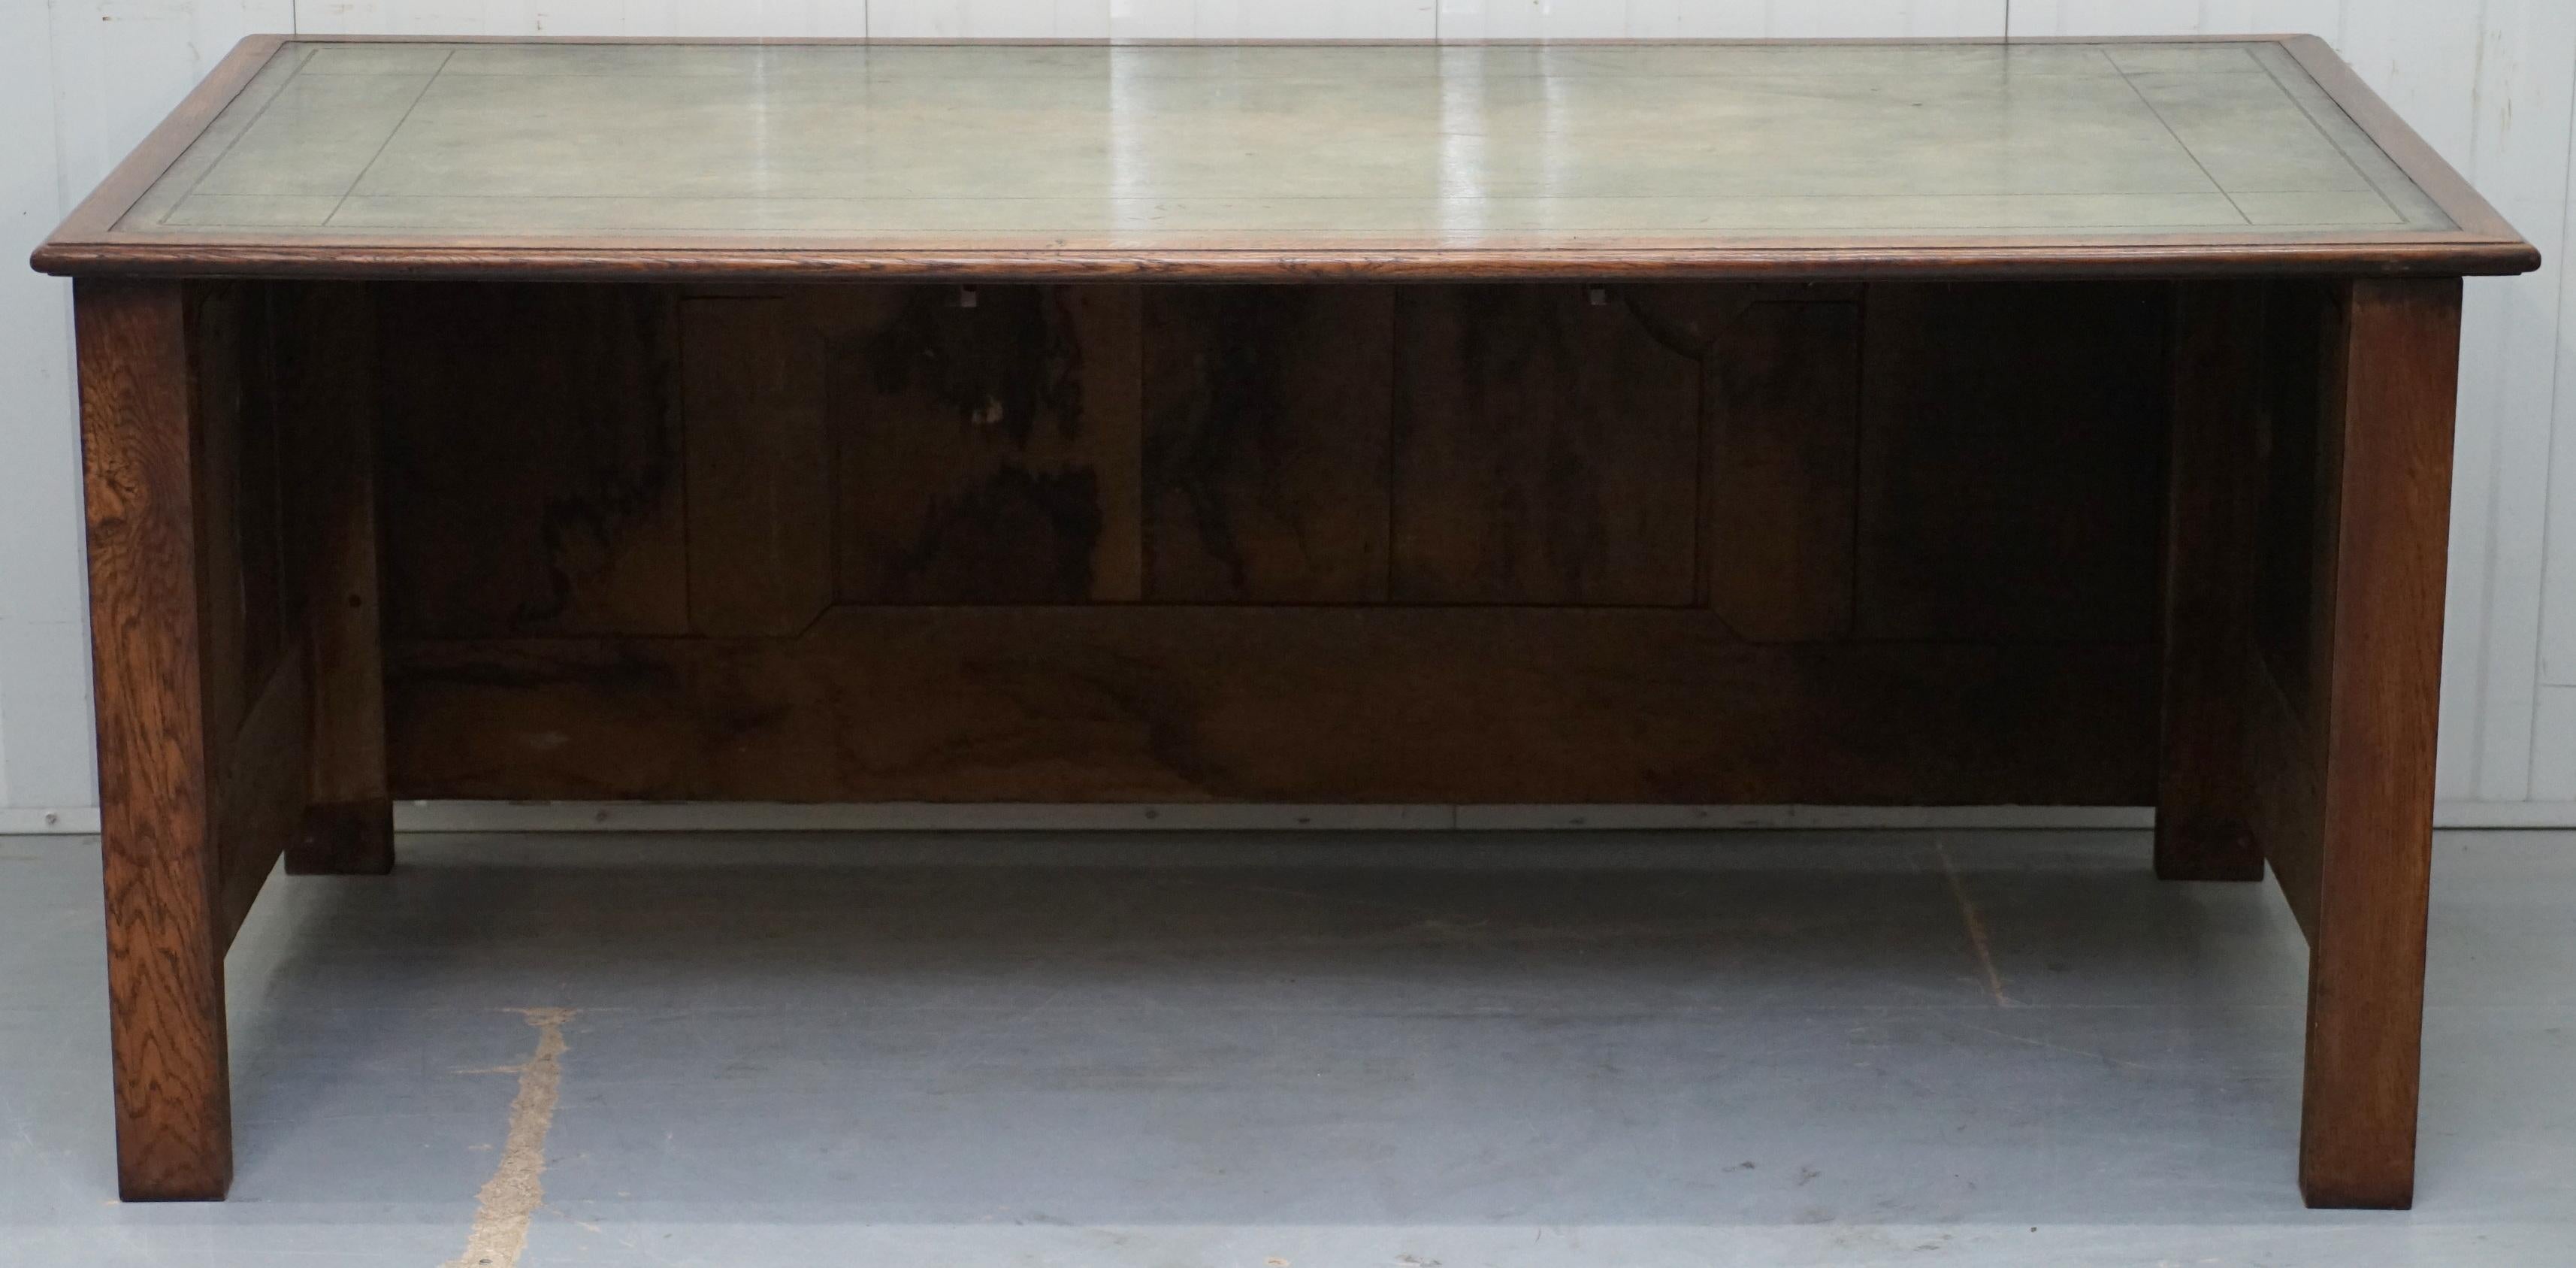 Hand-Crafted Stunning circa 1900 Oak & Green Leather Topped Desk or Shops Counter Arts Crafts